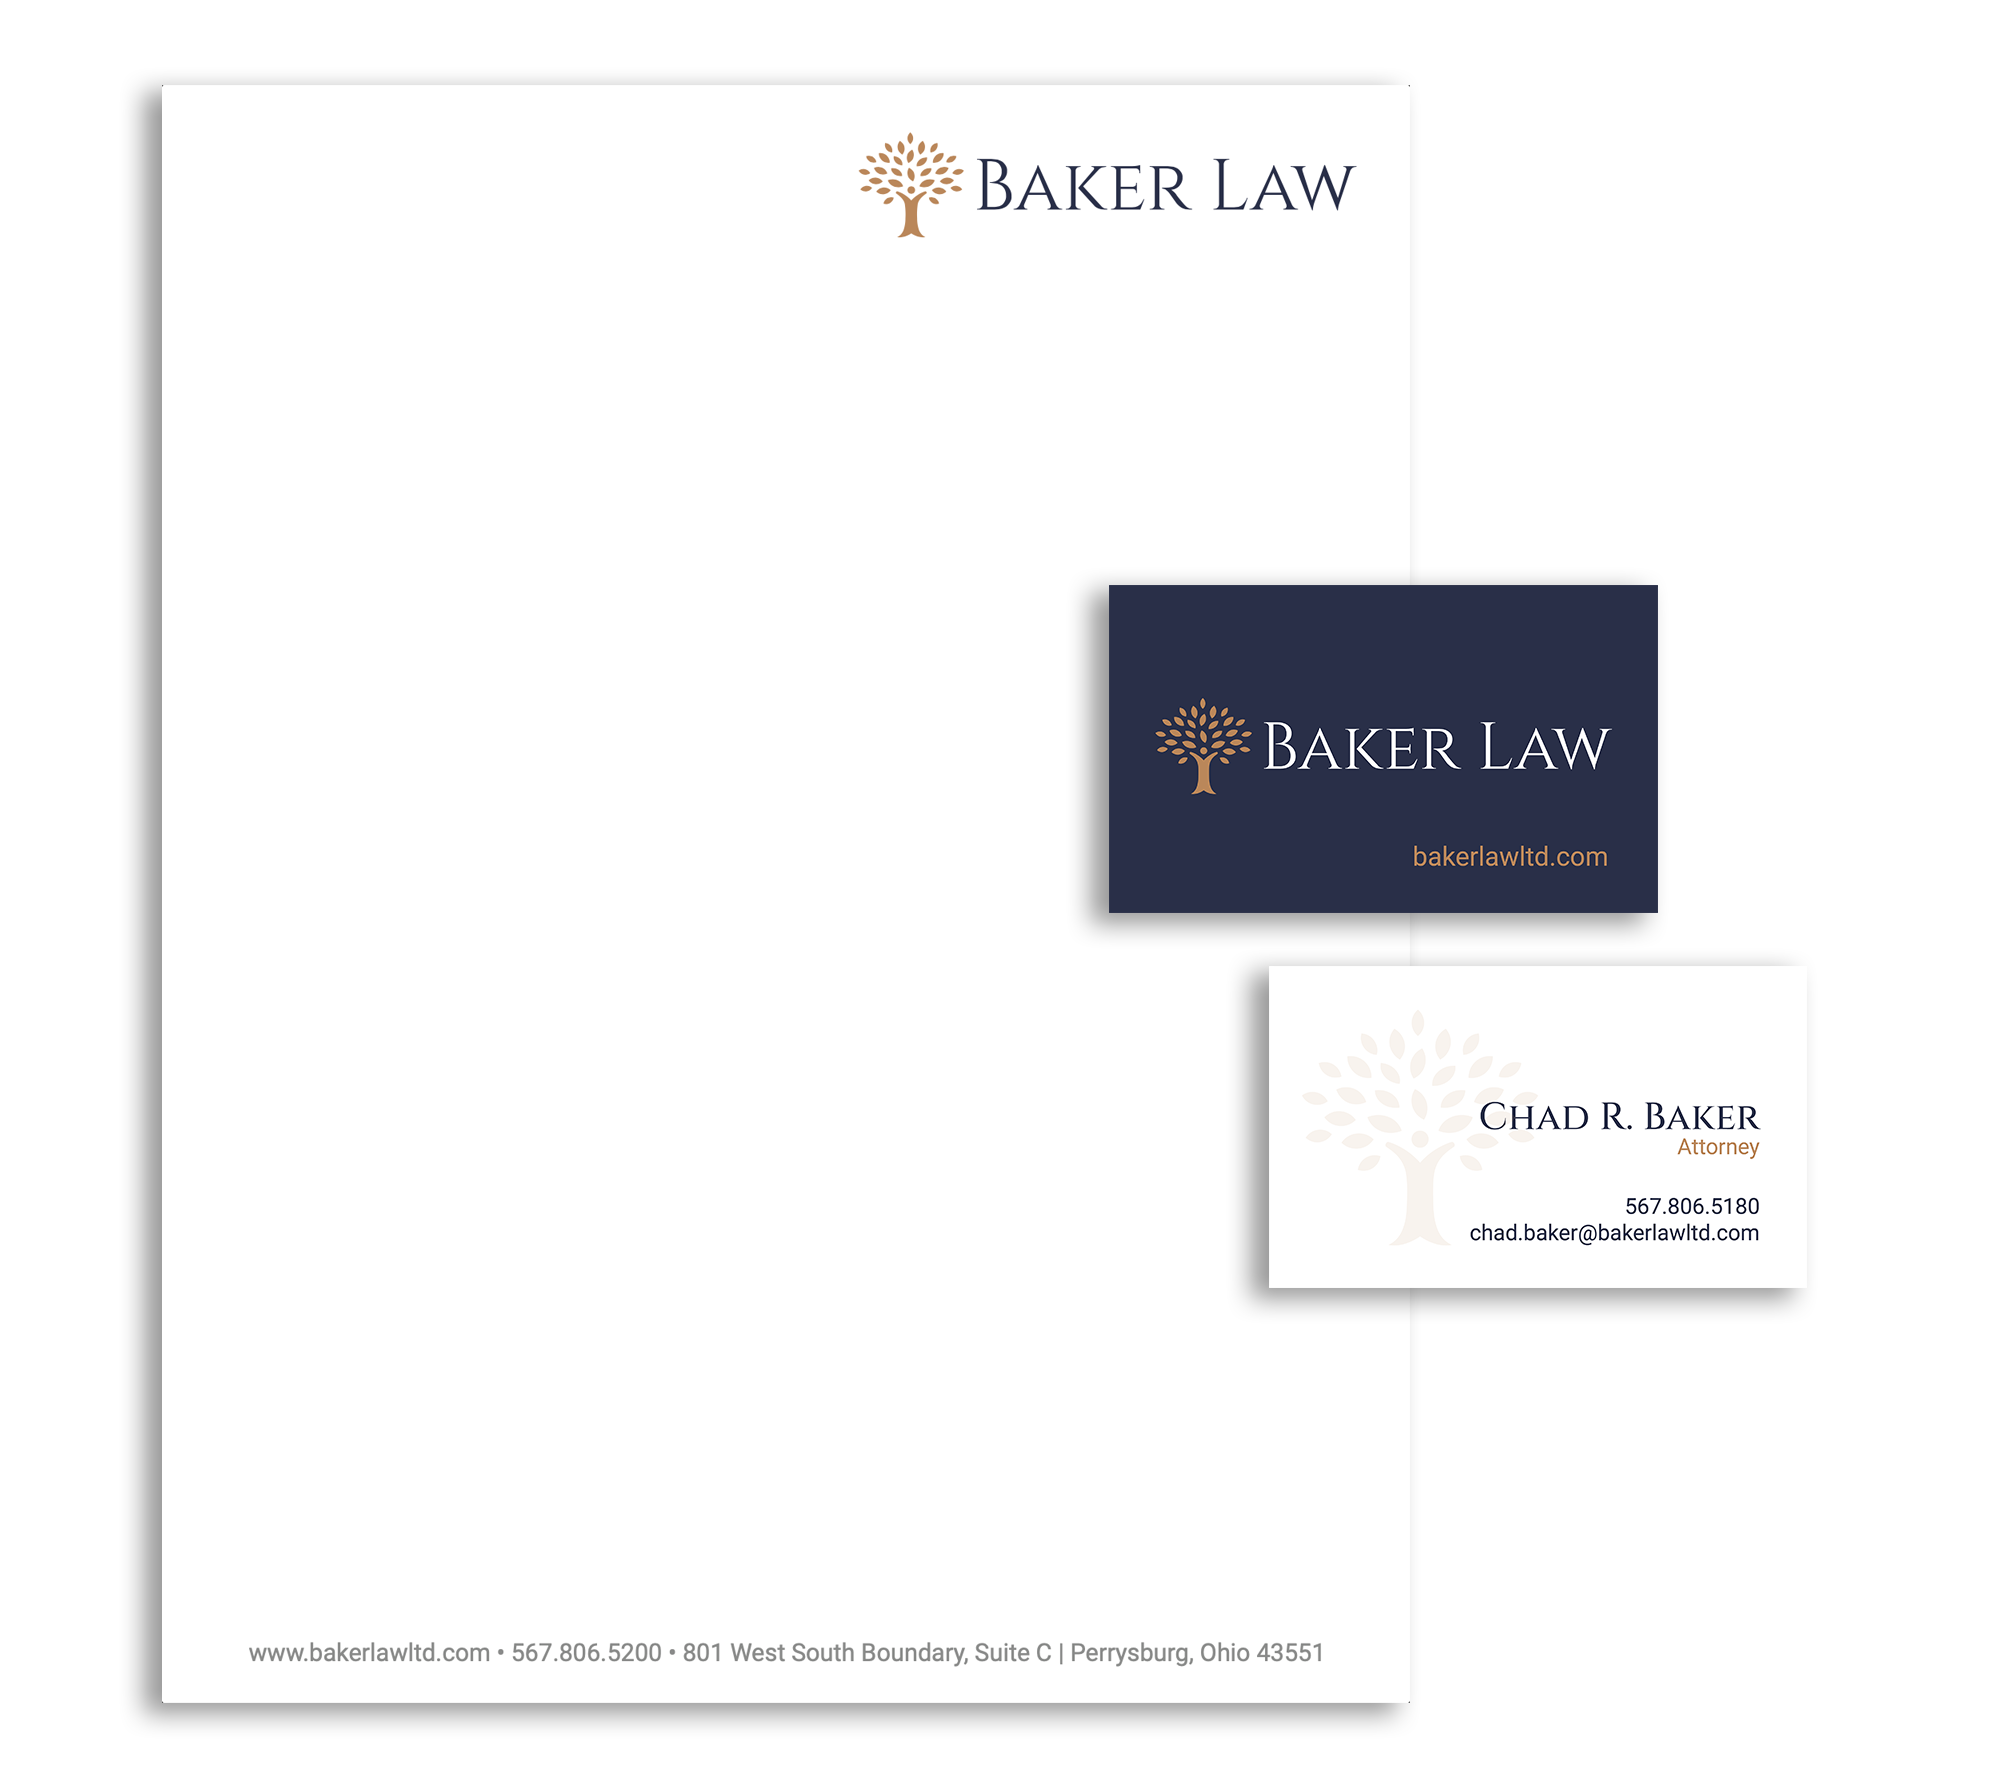 Baker Law Letterhead and Business Cards